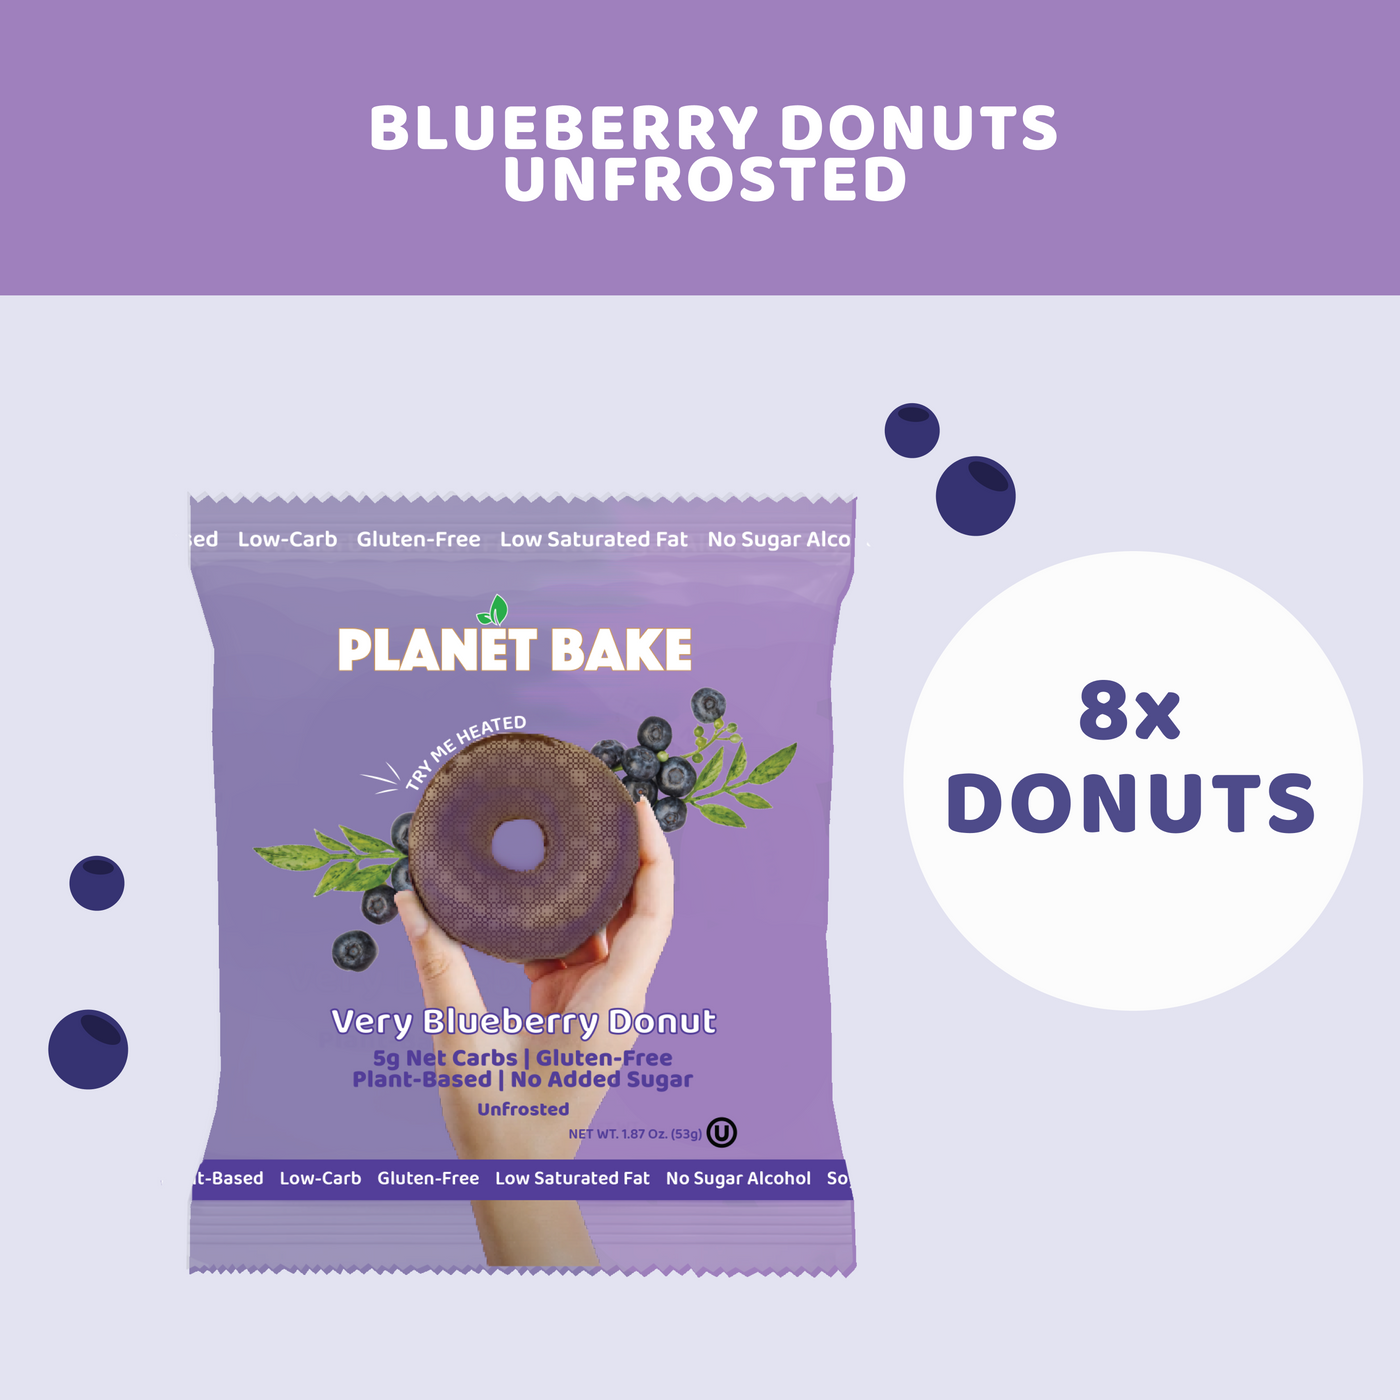 Unfrosted Blueberry Donuts (8pack)